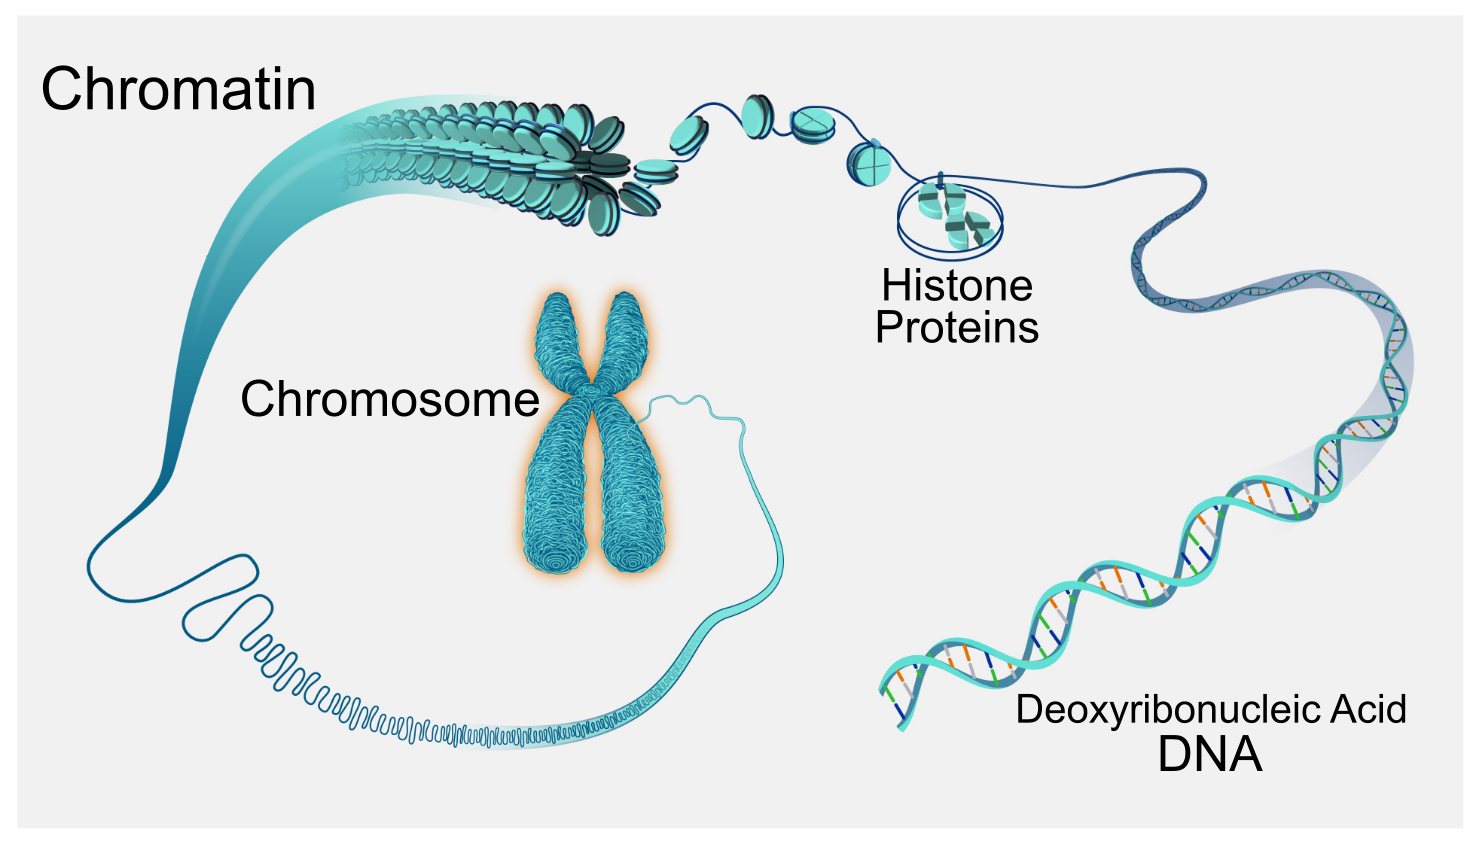 This image shows a large chromosome with chromatin unraveling and looping around the top of the chromosome. The chromatin is magnified further, showing disc-like histone proteins wrapped by DNA. The DNA is magnified further, showing the double helix.